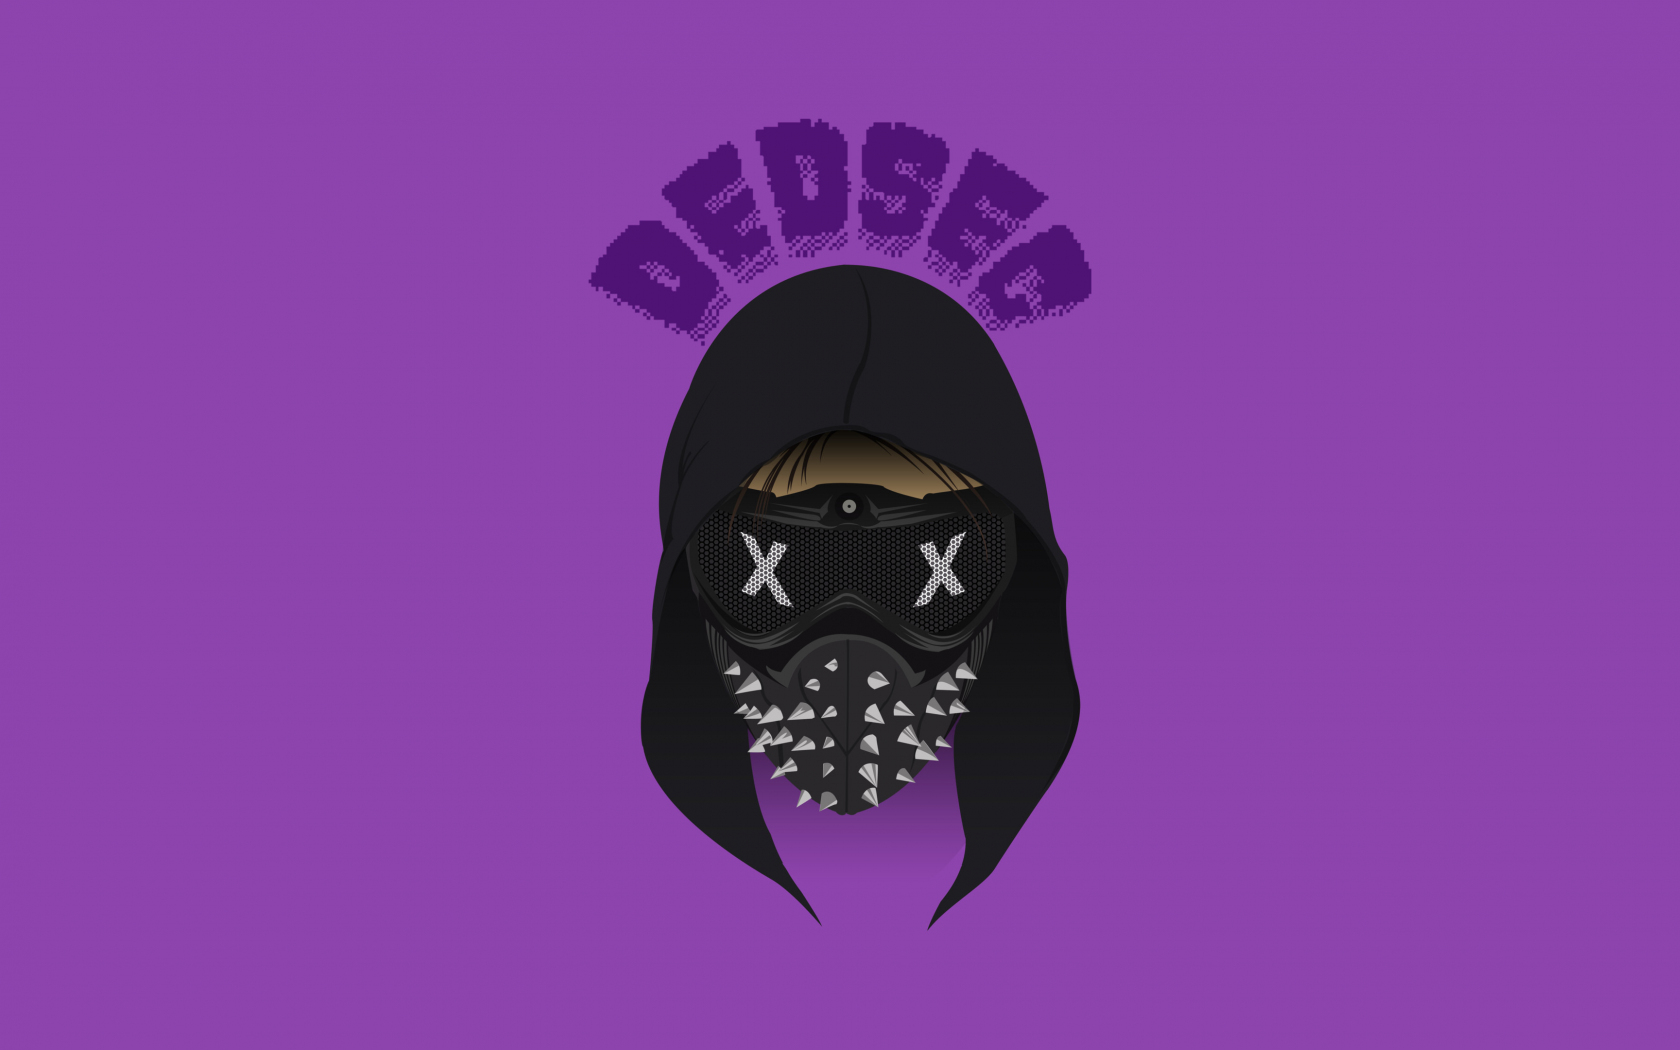 Download Dedsec Watch Dogs 2 Minimal Purple Video Game 1680x1050 Wallpaper 16 10 Widescreen 1680x1050 Hd Image Background 3400